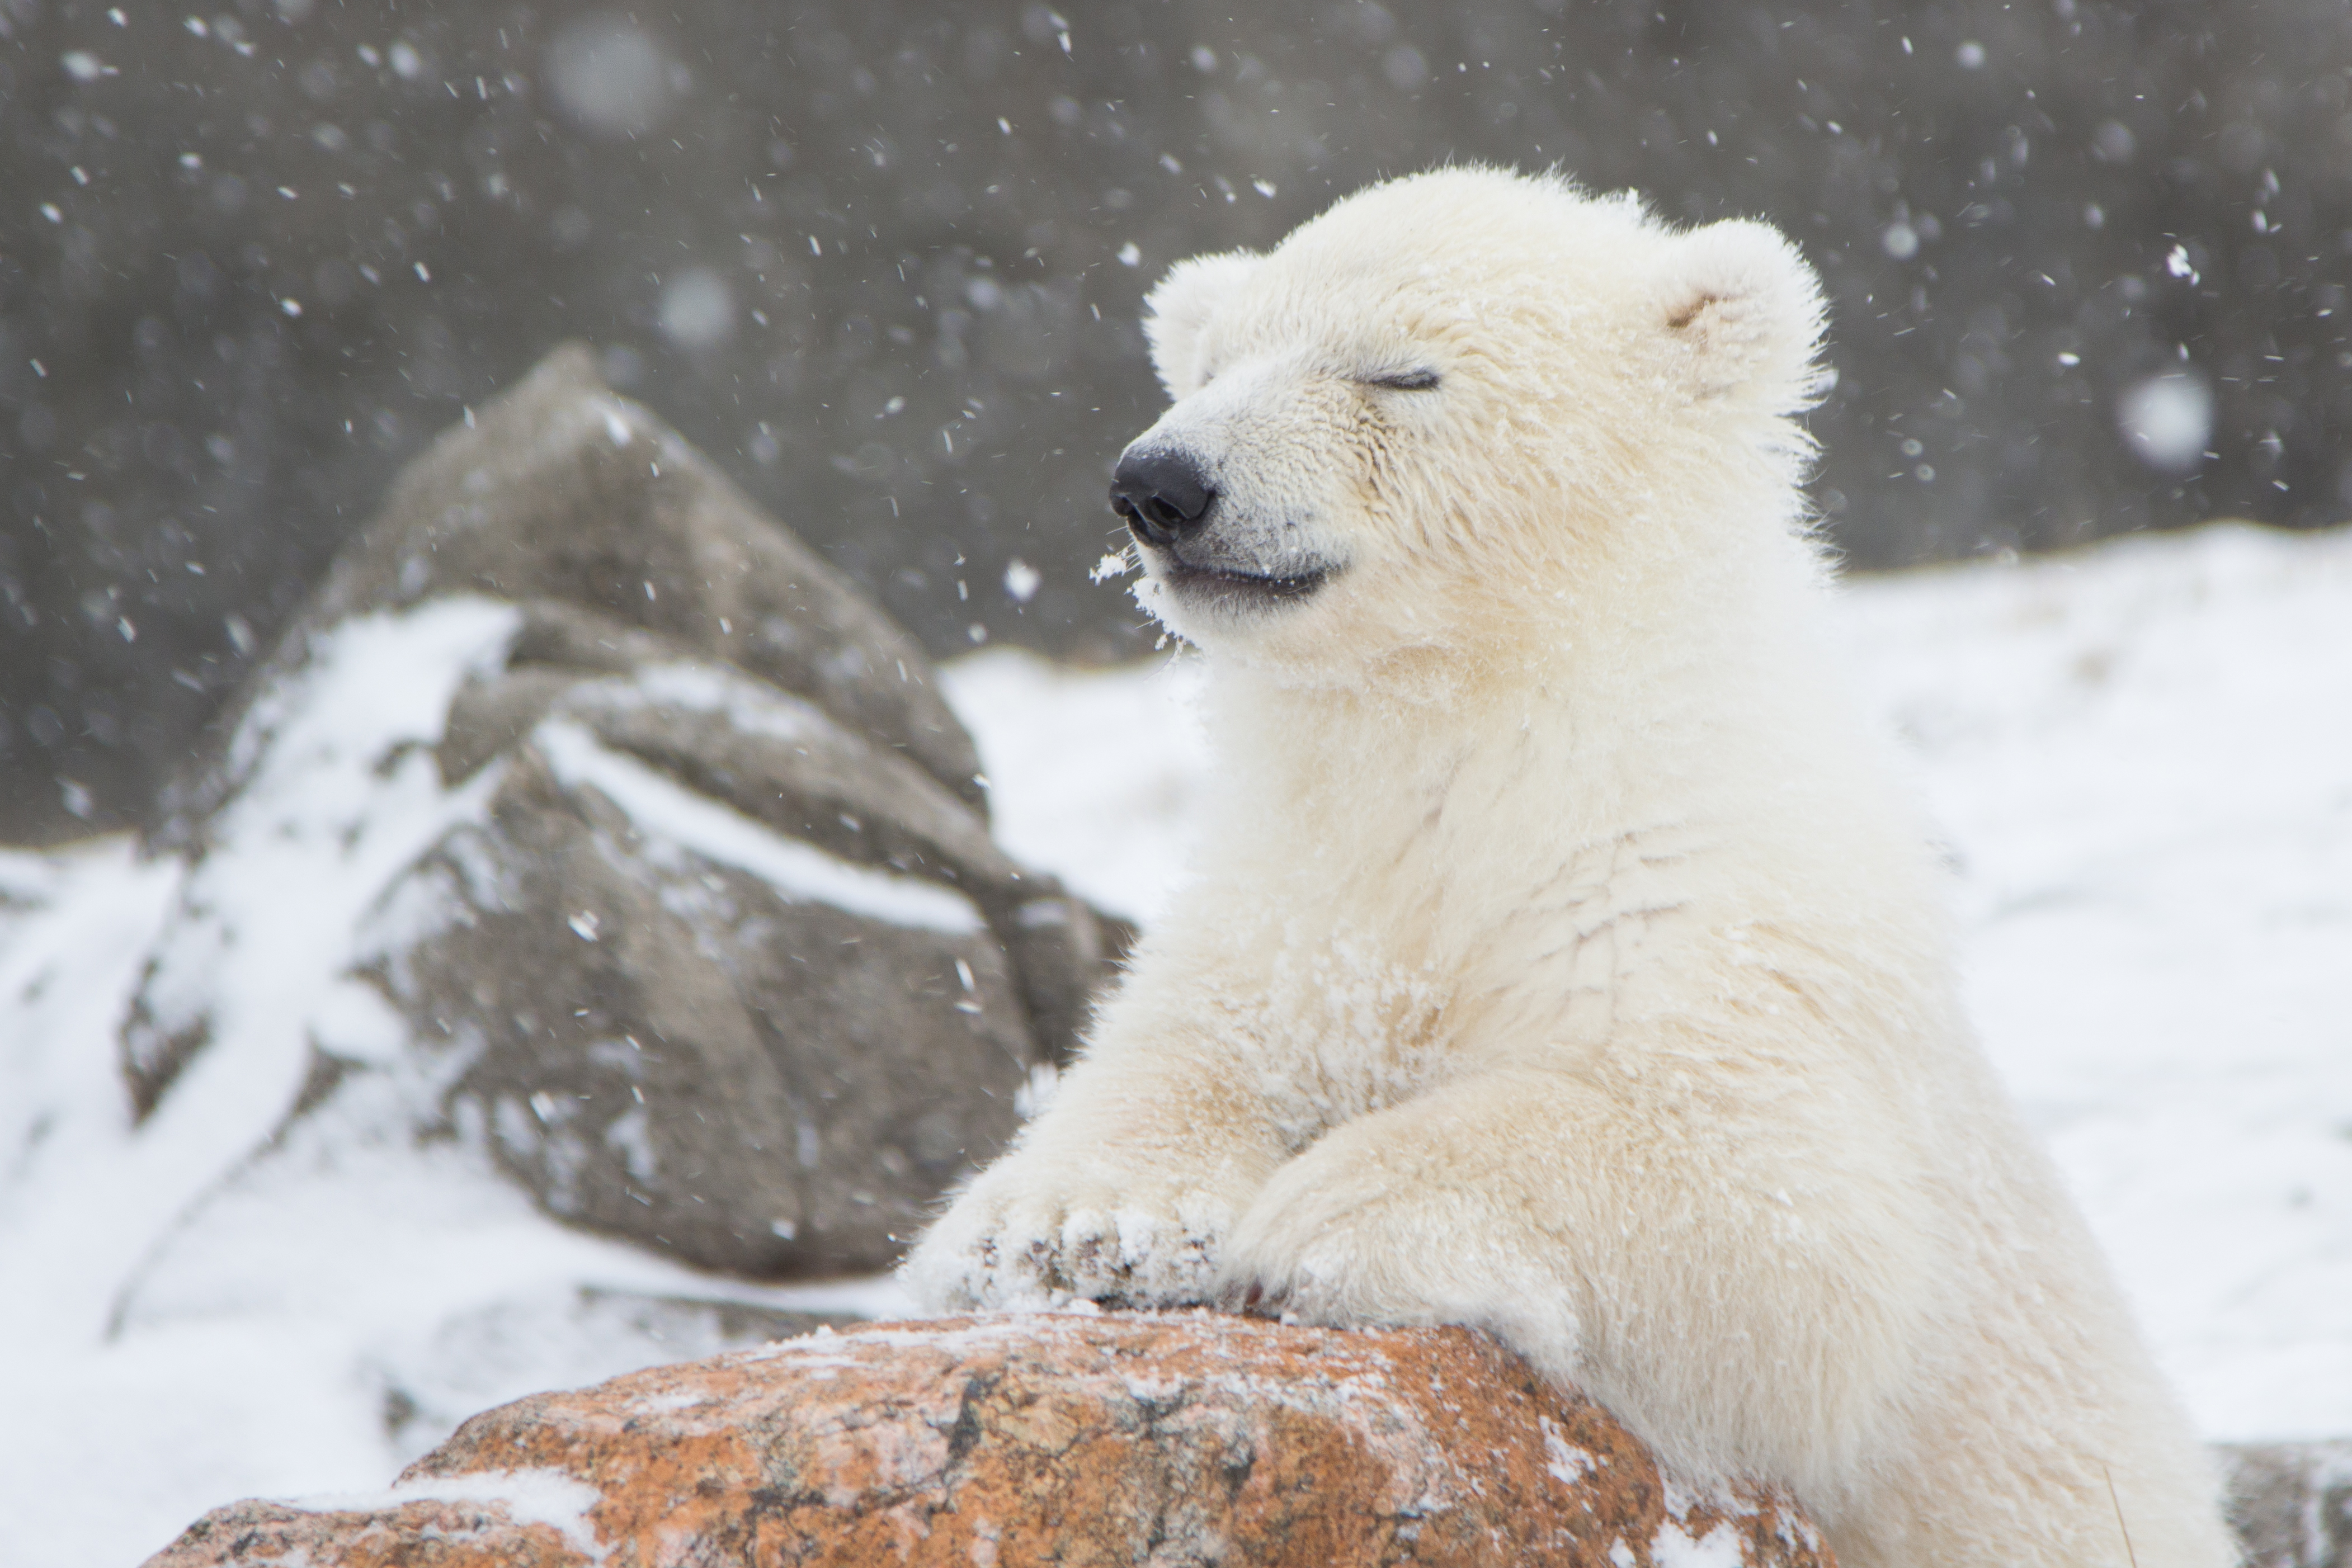 Climate Change is making life difficult for polar bears across the world. 